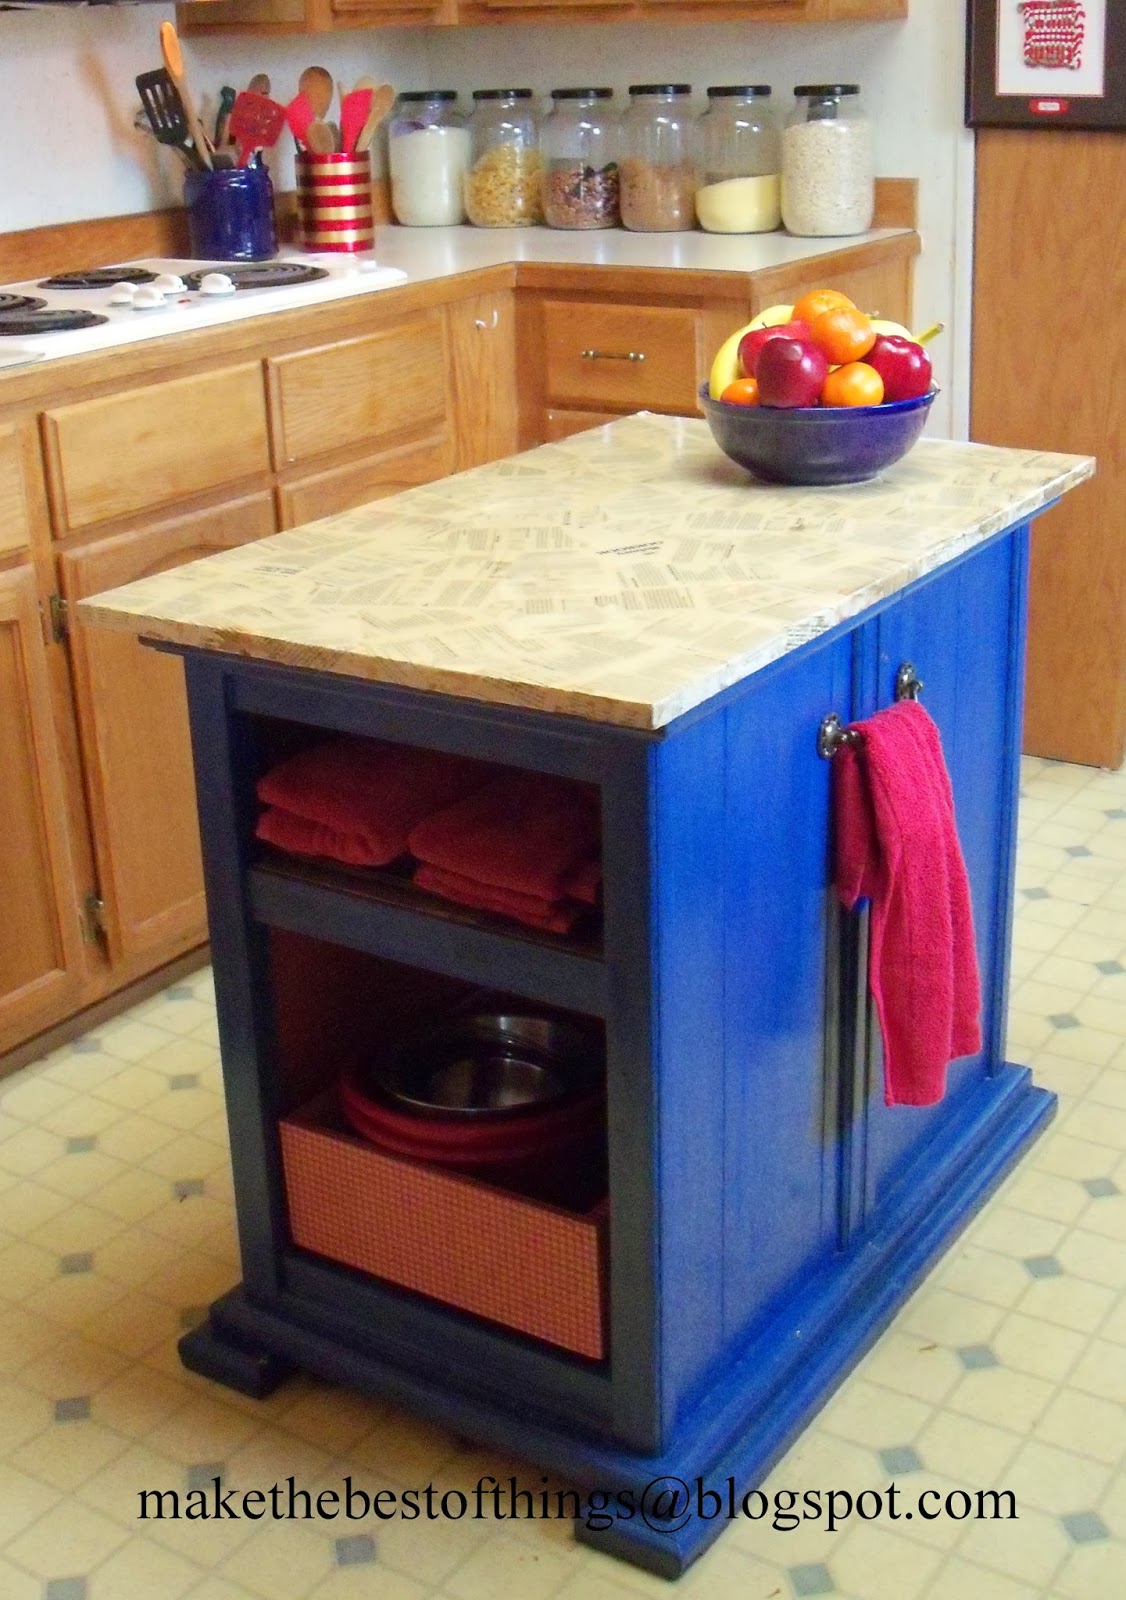 Make The Best of Things: Nightstands Turned Kitchen Island 